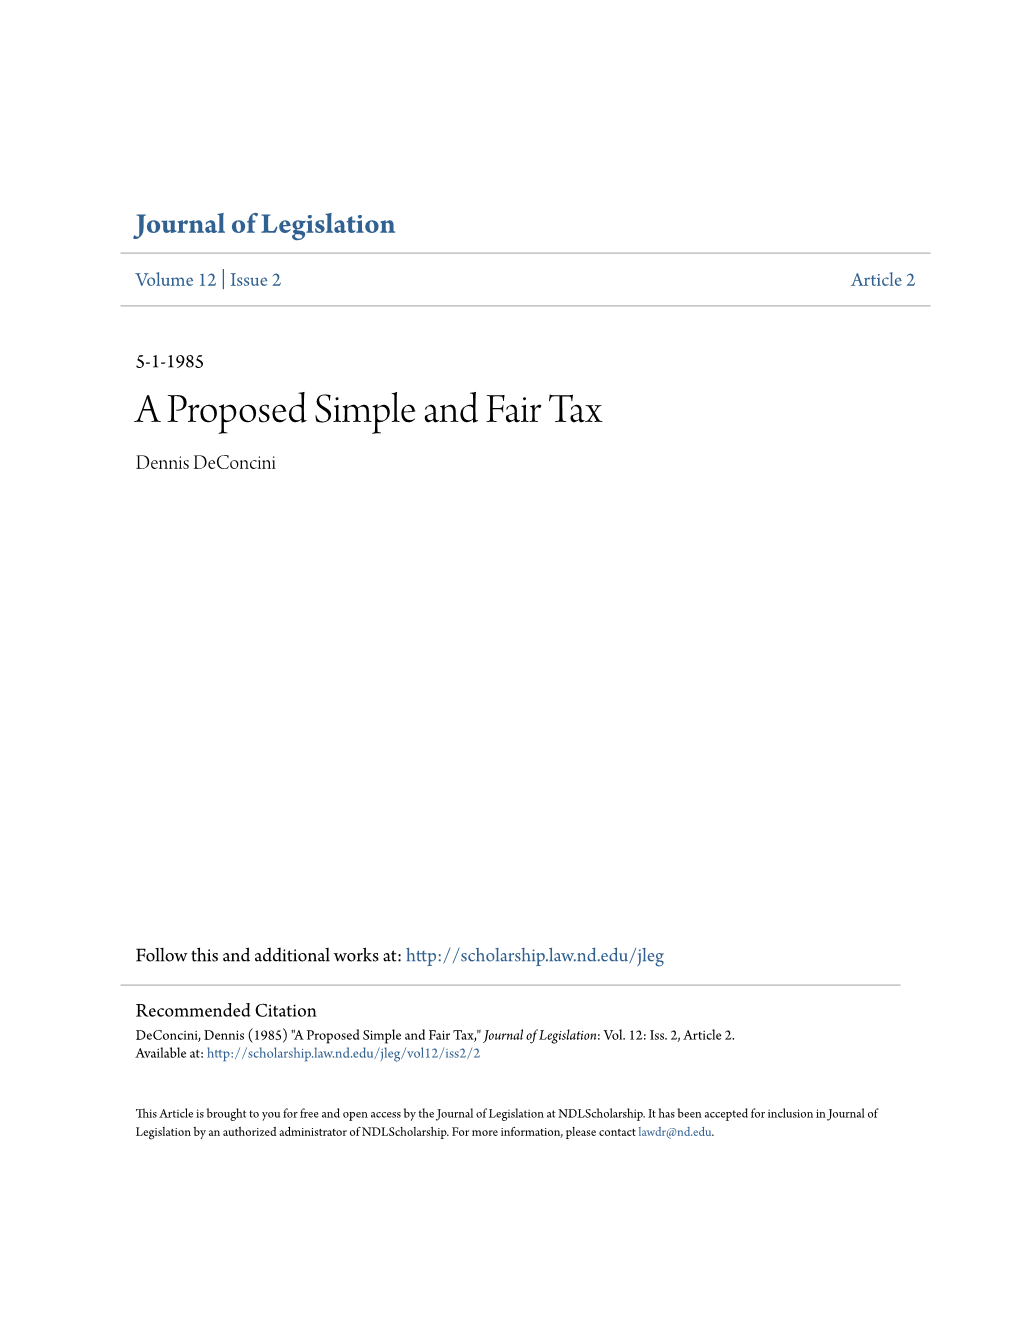 A Proposed Simple and Fair Tax Dennis Deconcini